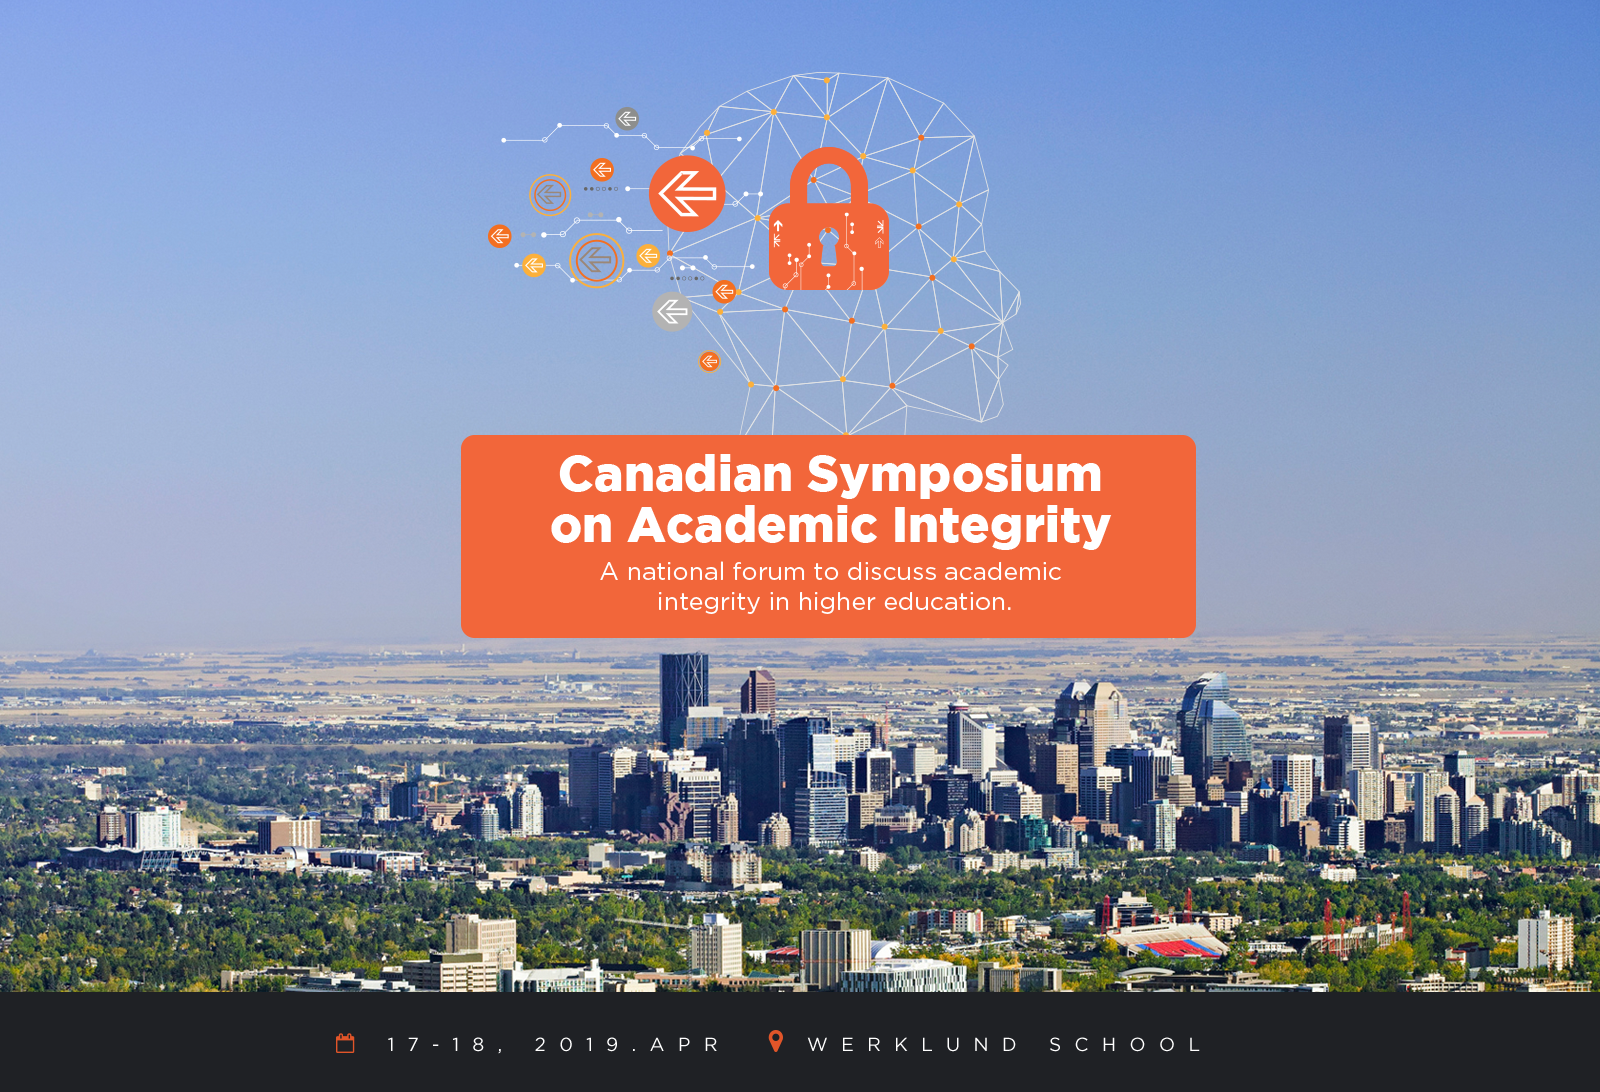 Canadian Symposium on Academic Integrity - A national forum to discuss academic integrity in higher education